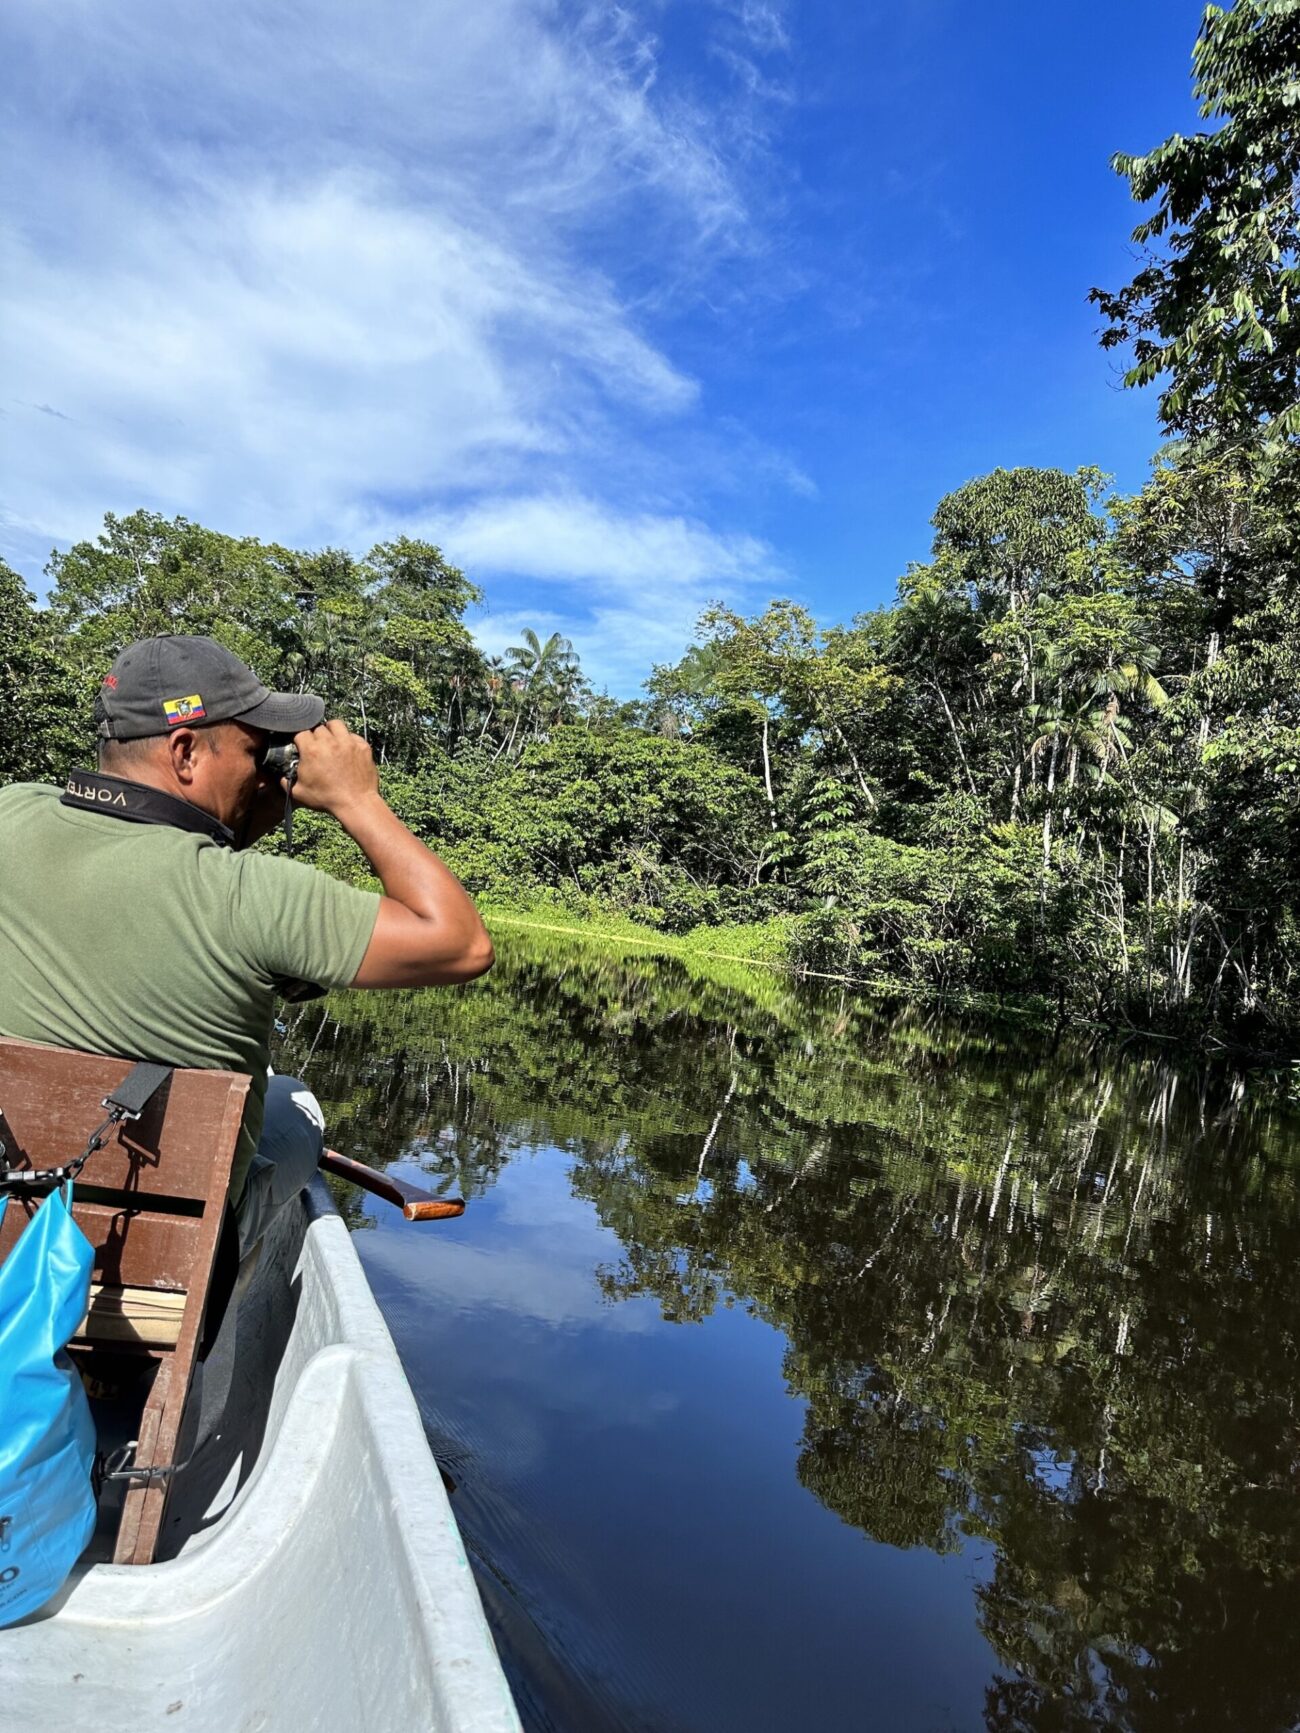 A man looks out on the water with binoculars on a boat in the Amazon rainforest.